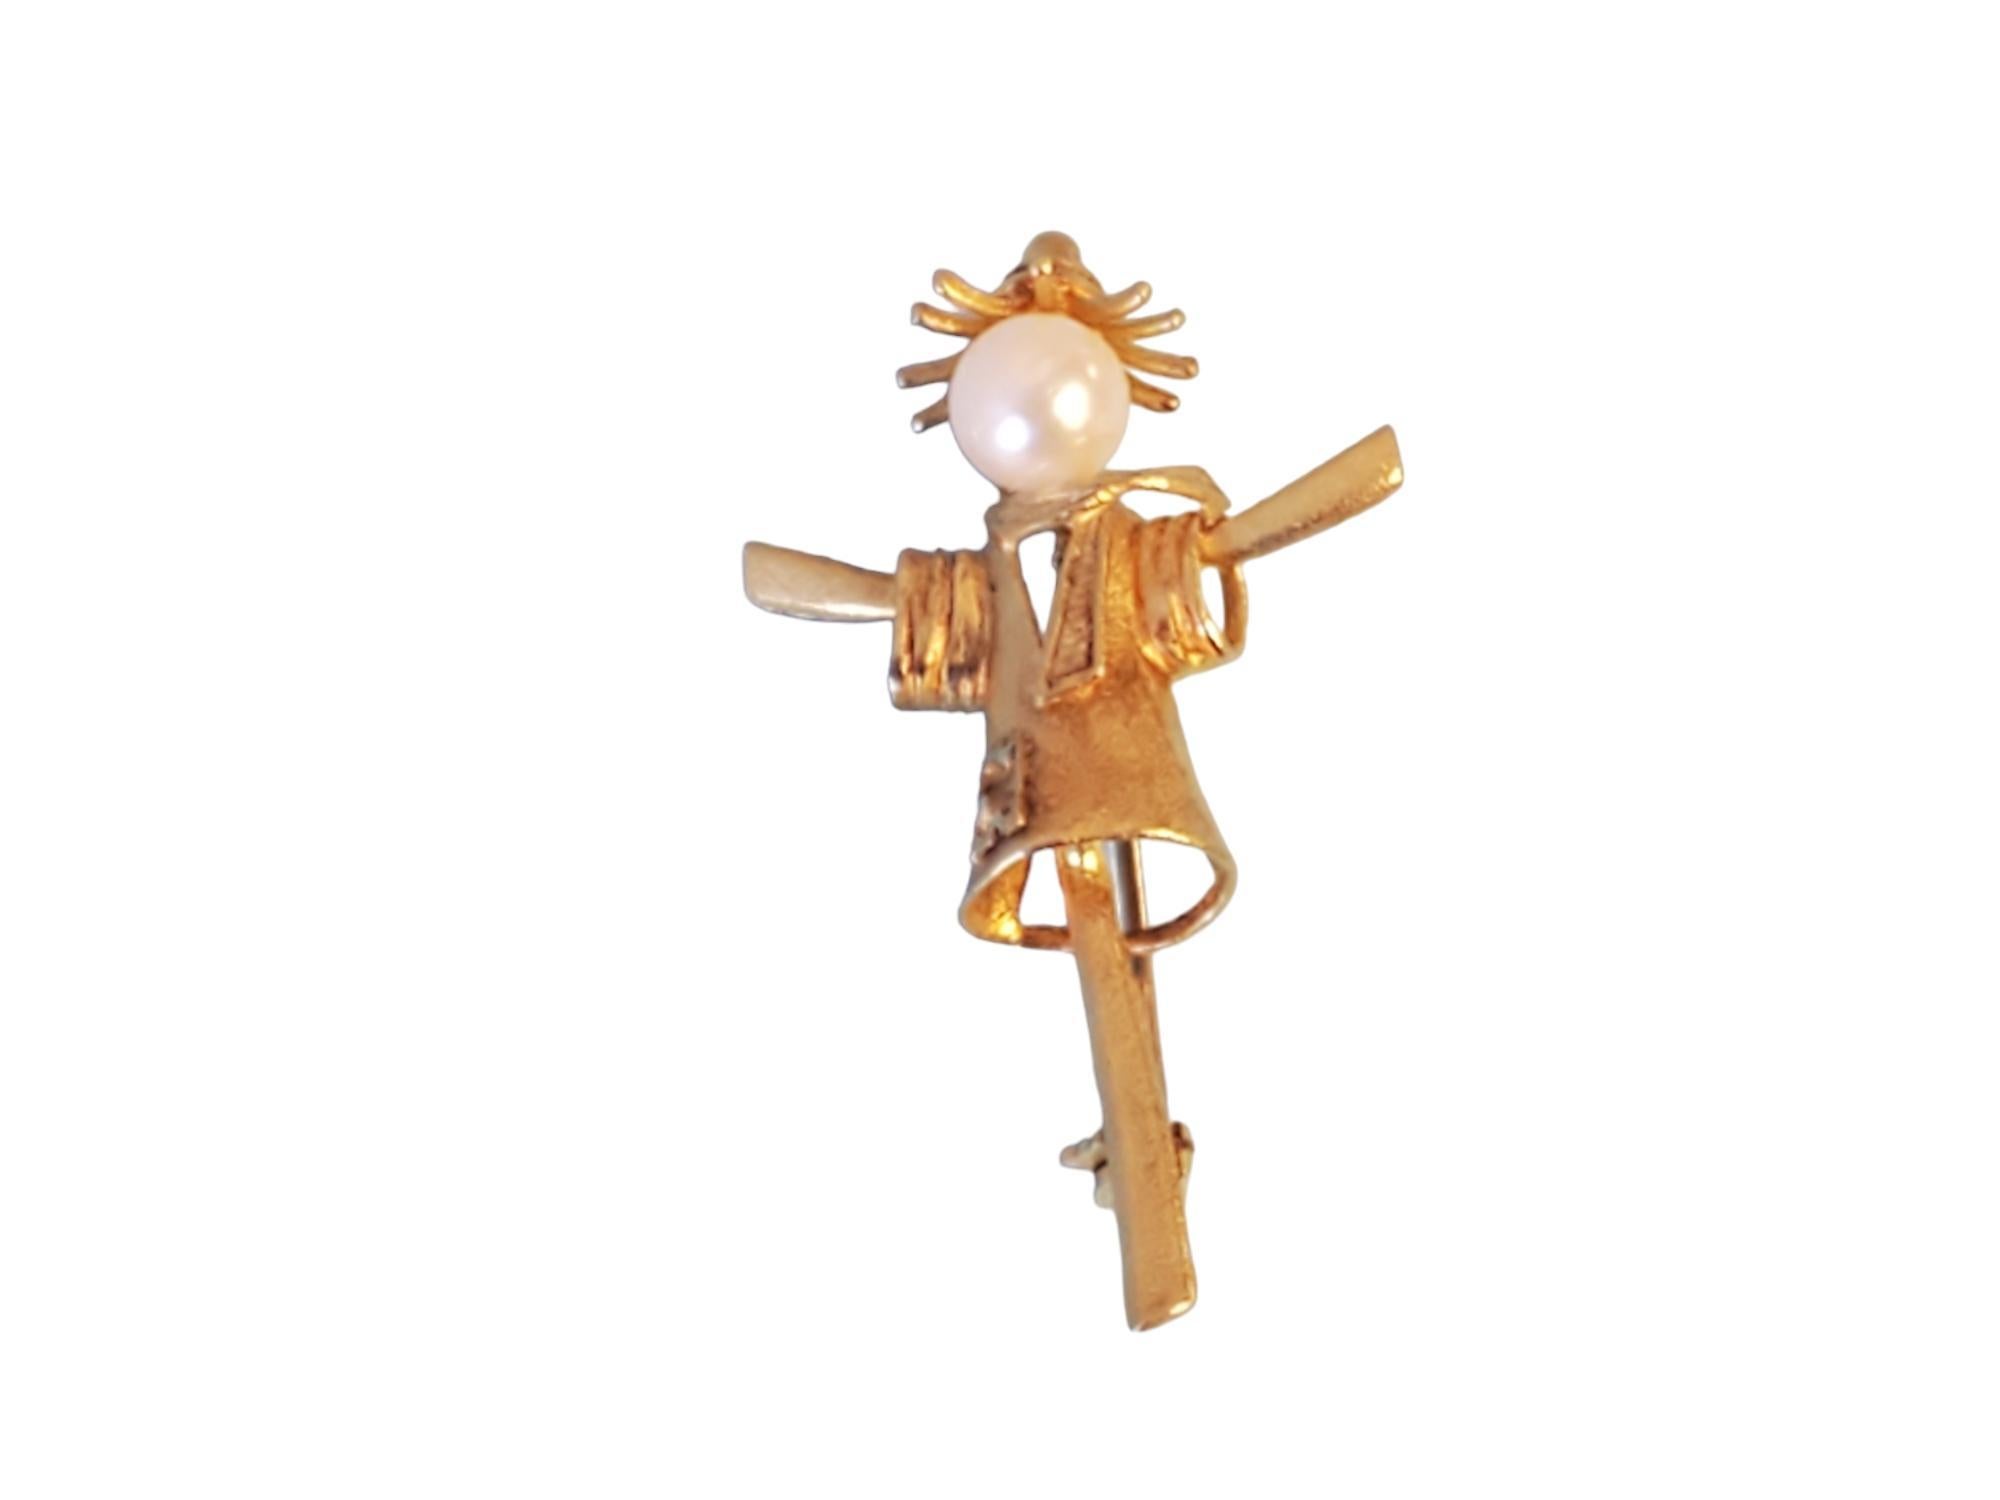 Listed is a 14k Italian made scarecrow brooch. The details on this piece are really nice and you can tell how well crafted this piece is. The head is a white pearl and the brooch is in very good condition. The piece is signed as shown in the images.